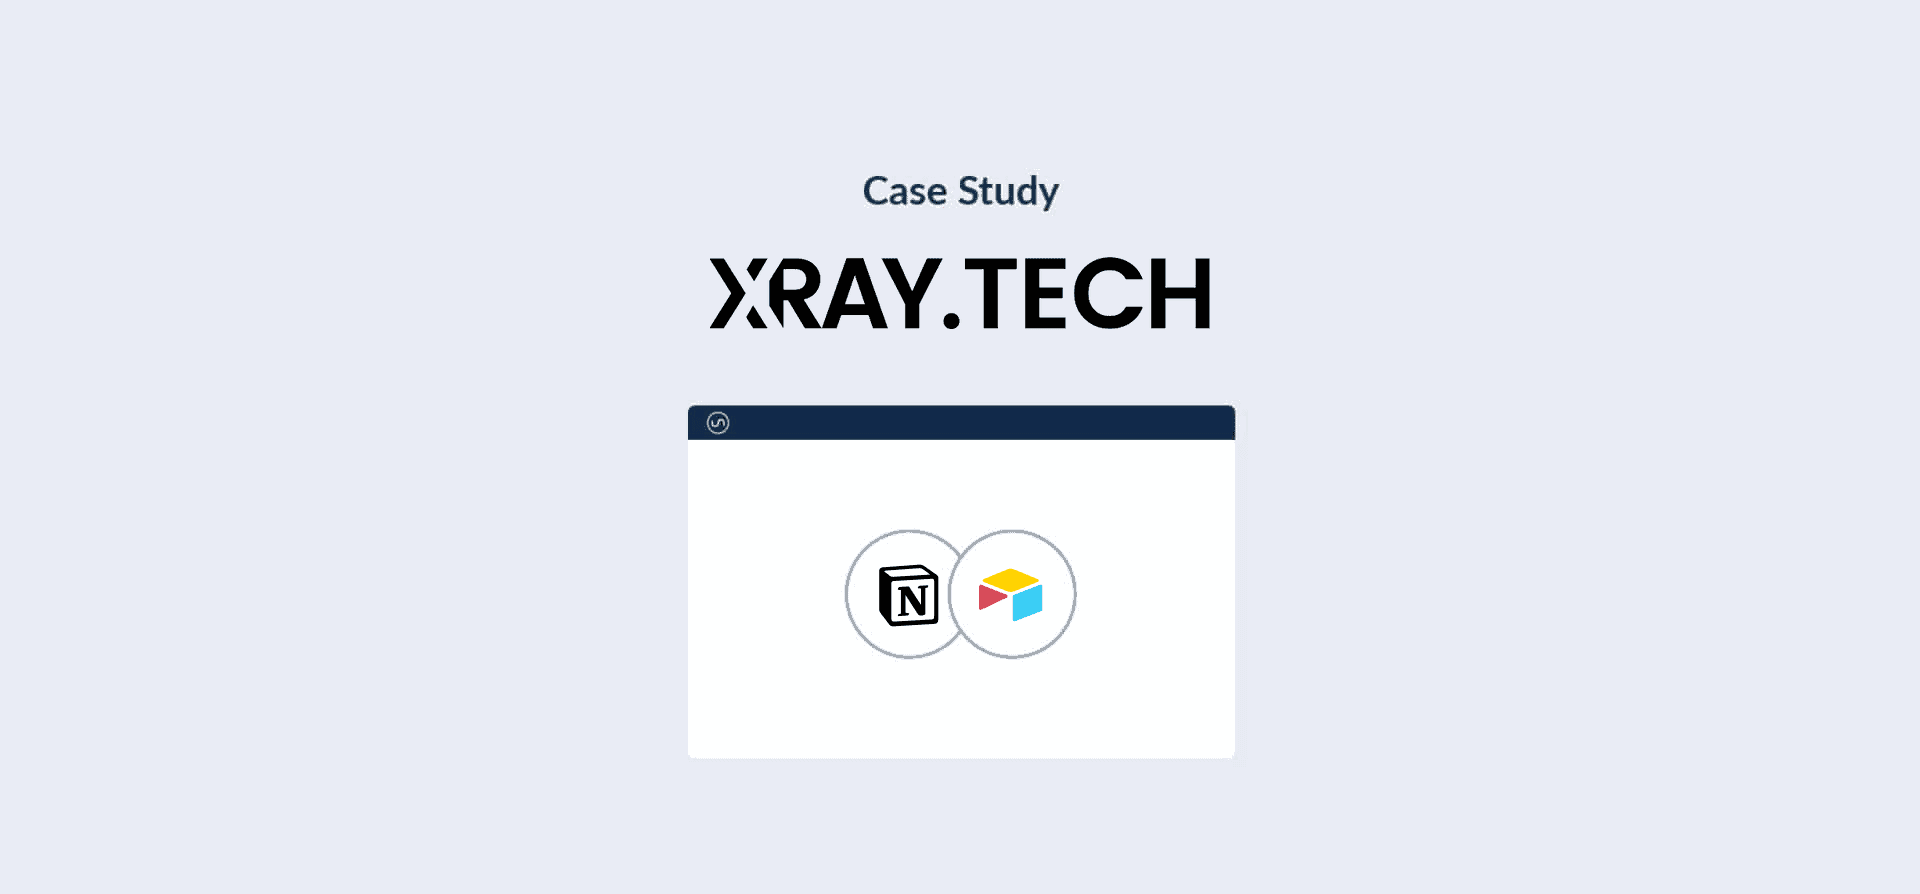 Logos for Notion, Airtable, and Xray.